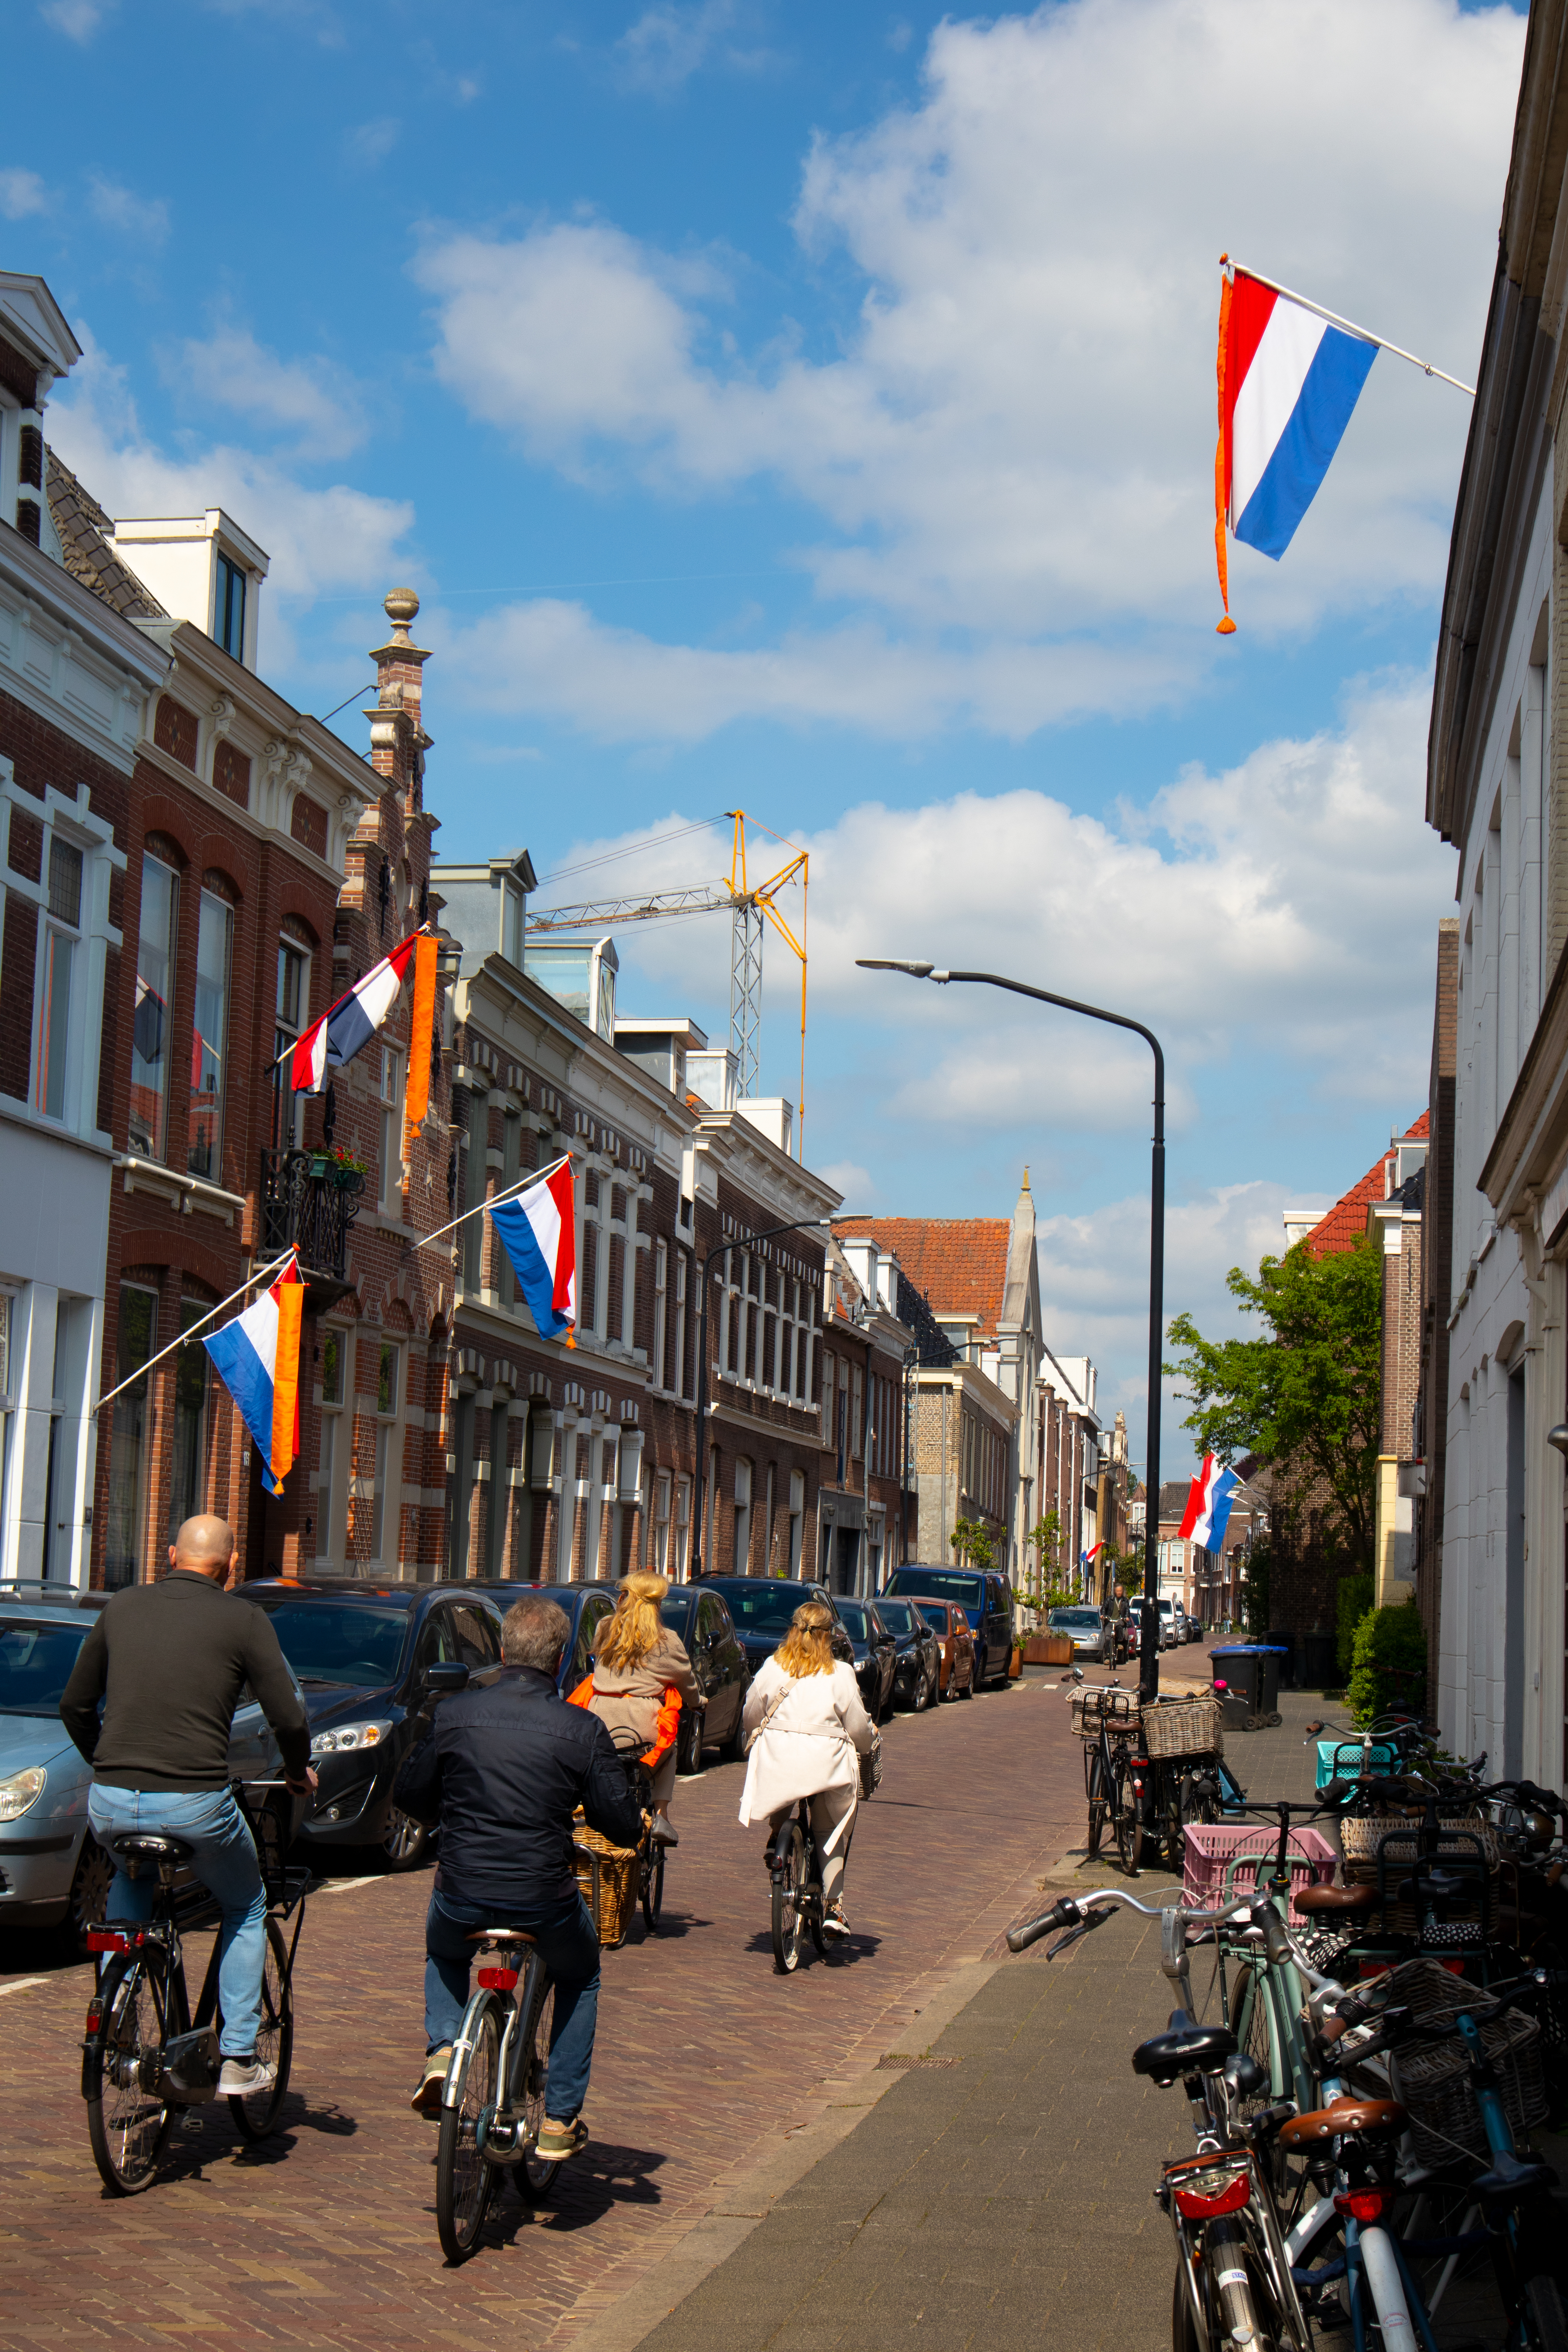 on bike riding to king's day festivities with Dutch flags in the streets